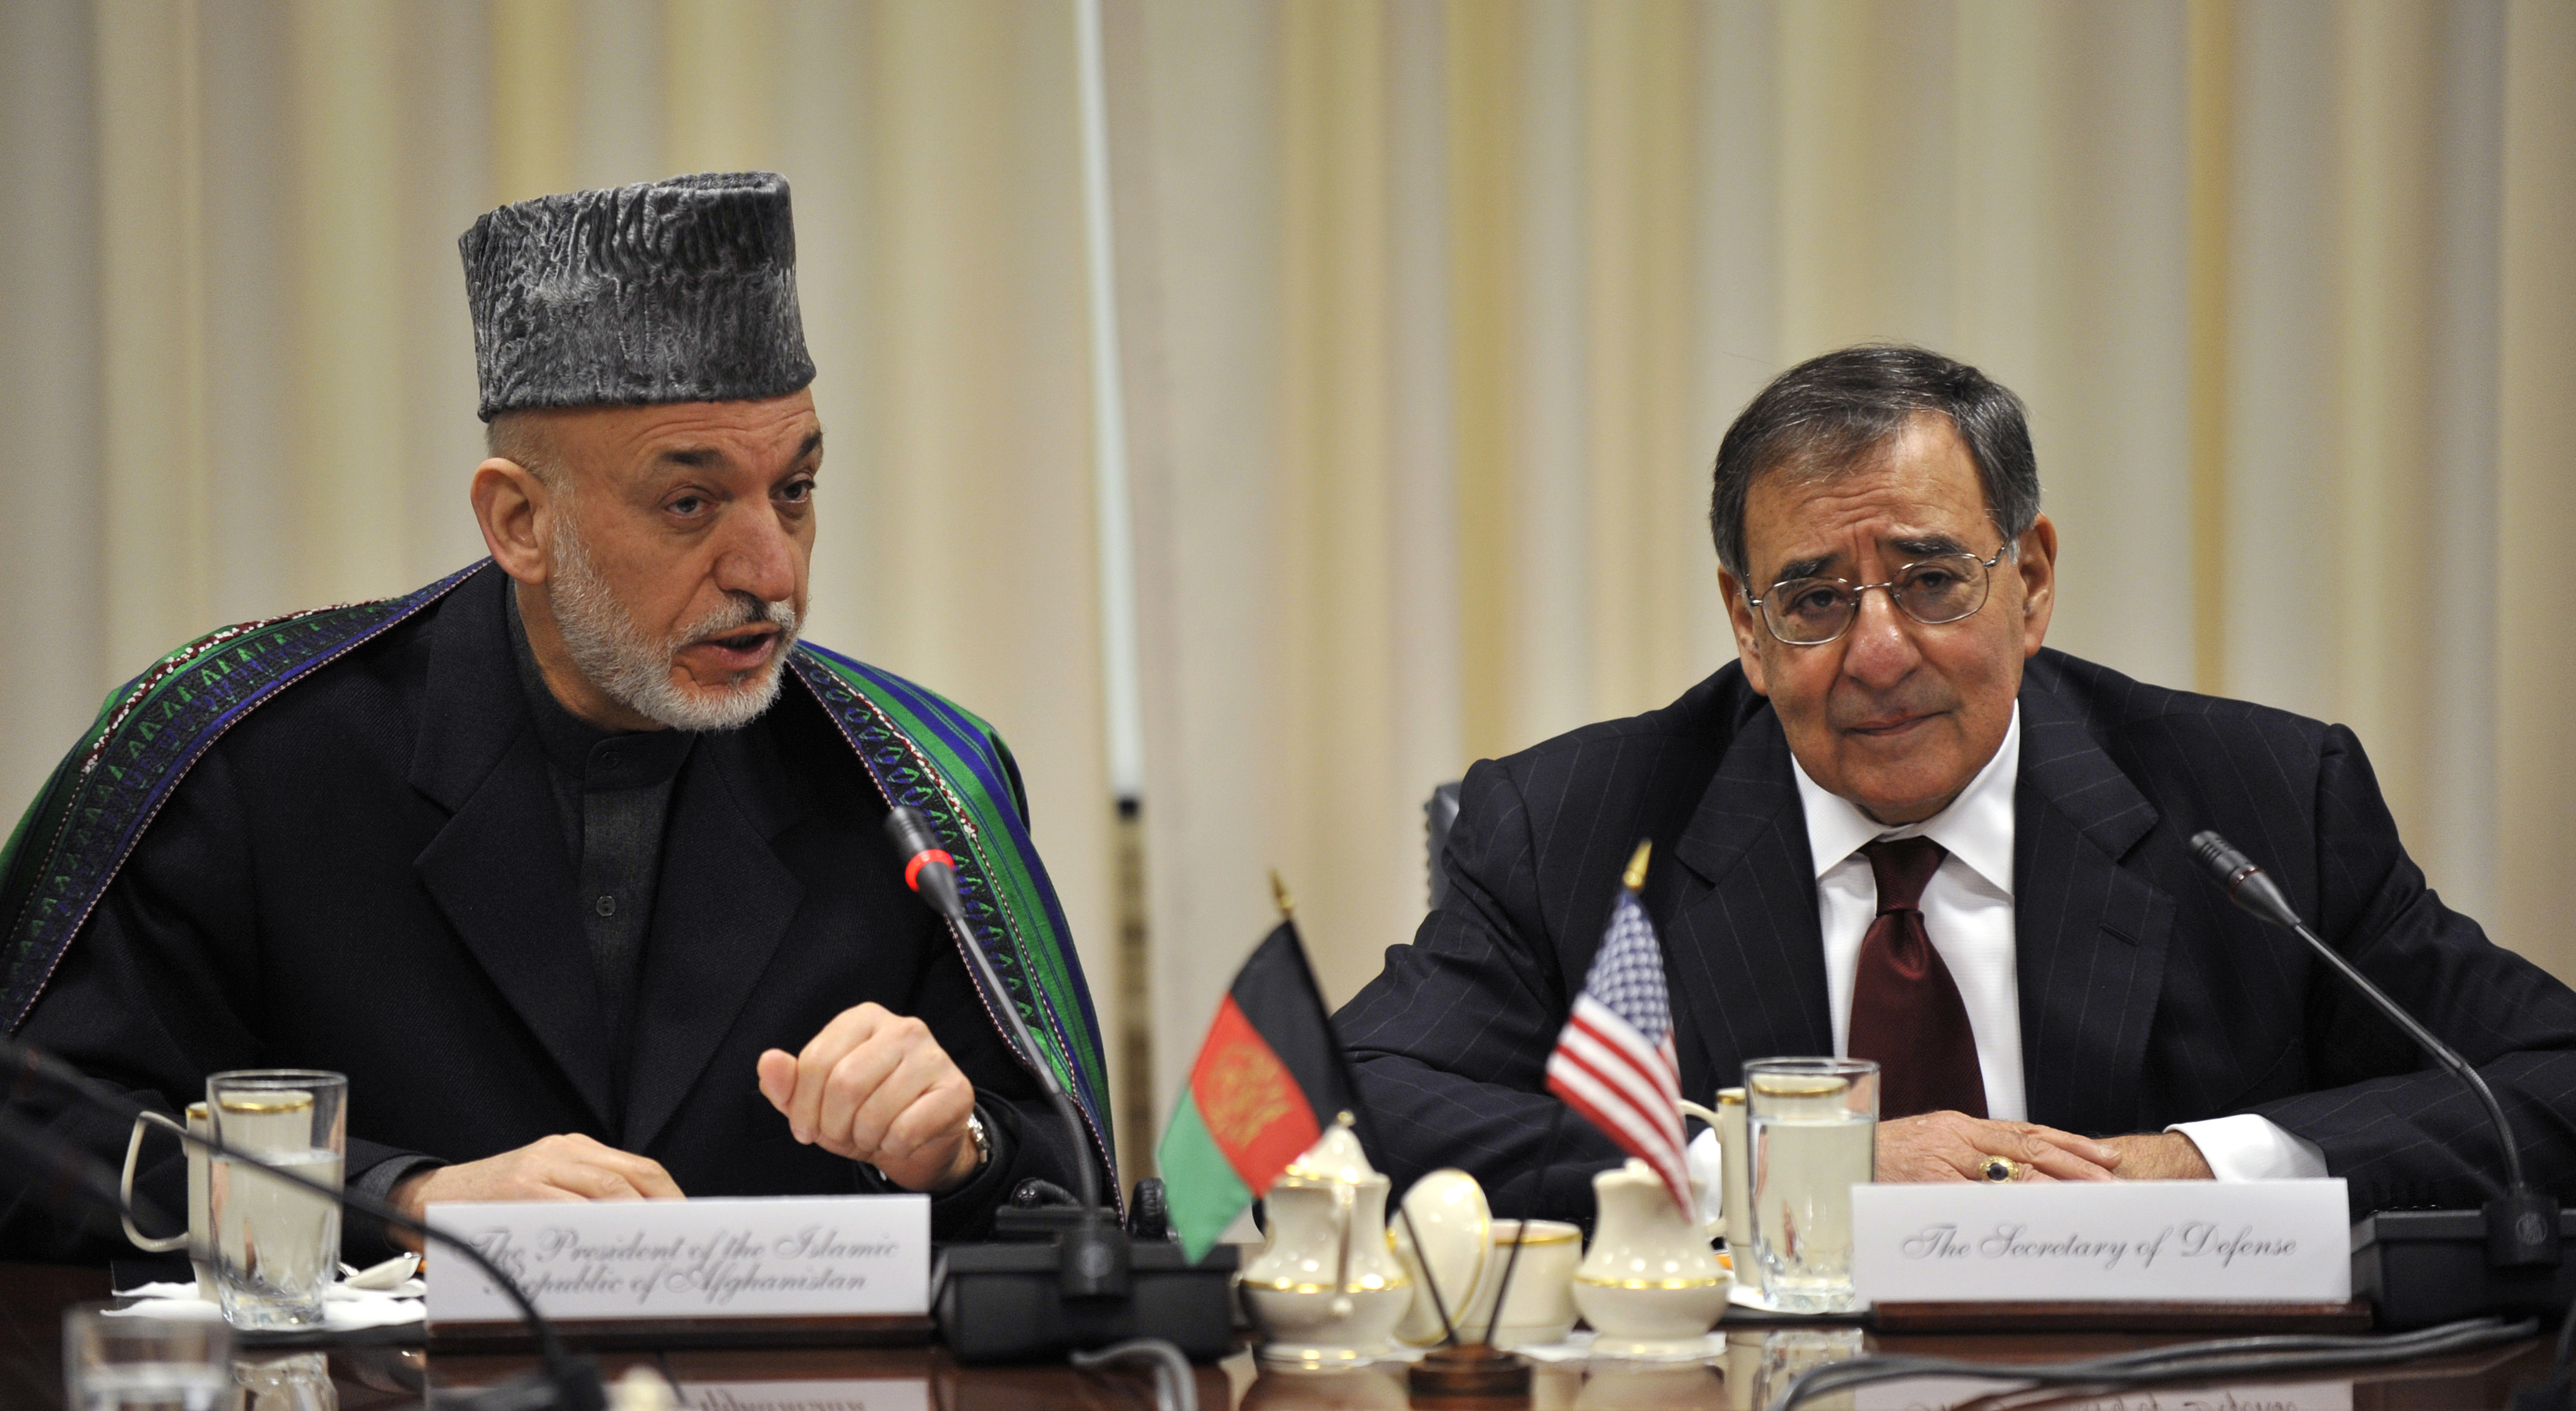 Afghanistan's President Hamid Karzai, left, makes his opening statement at the top of a meeting with Secretary of Defense Leon E. Panetta, right, and their senior advisors in the Pentagon 130110-D-NI589-543